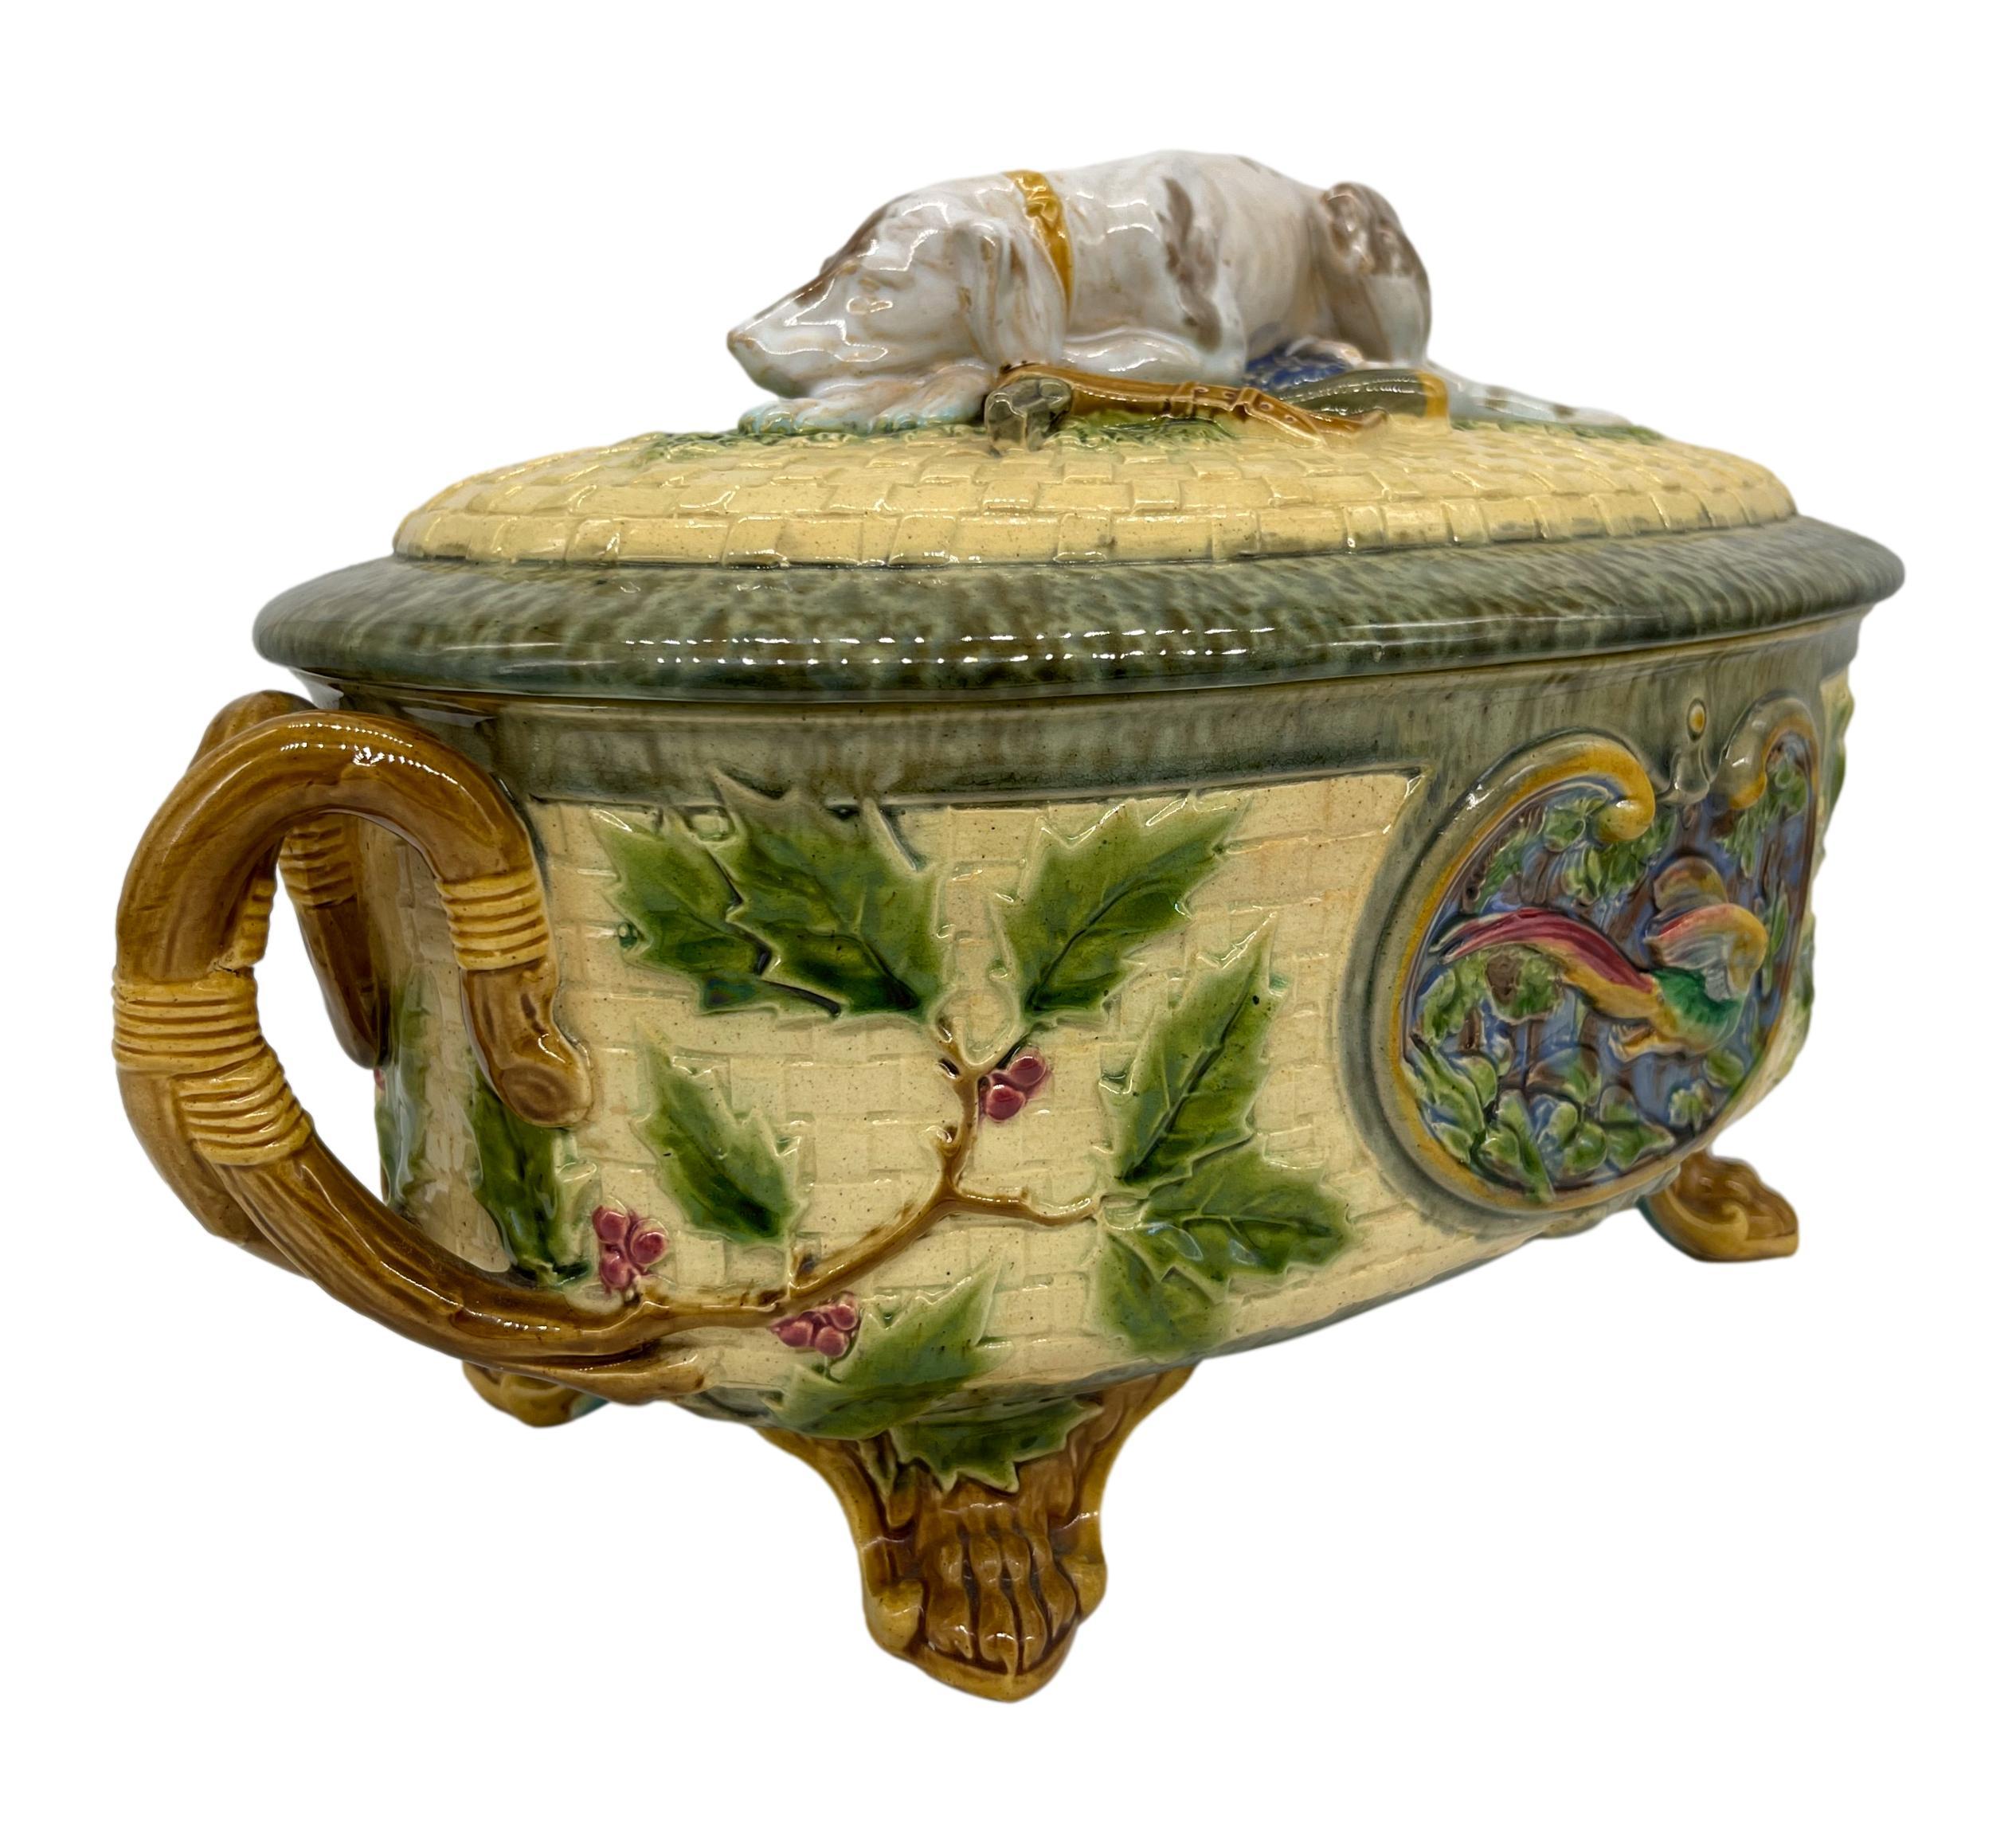 Molded Minton Majolica Game Tureen with Hunting Dog Finial, Dated 1872